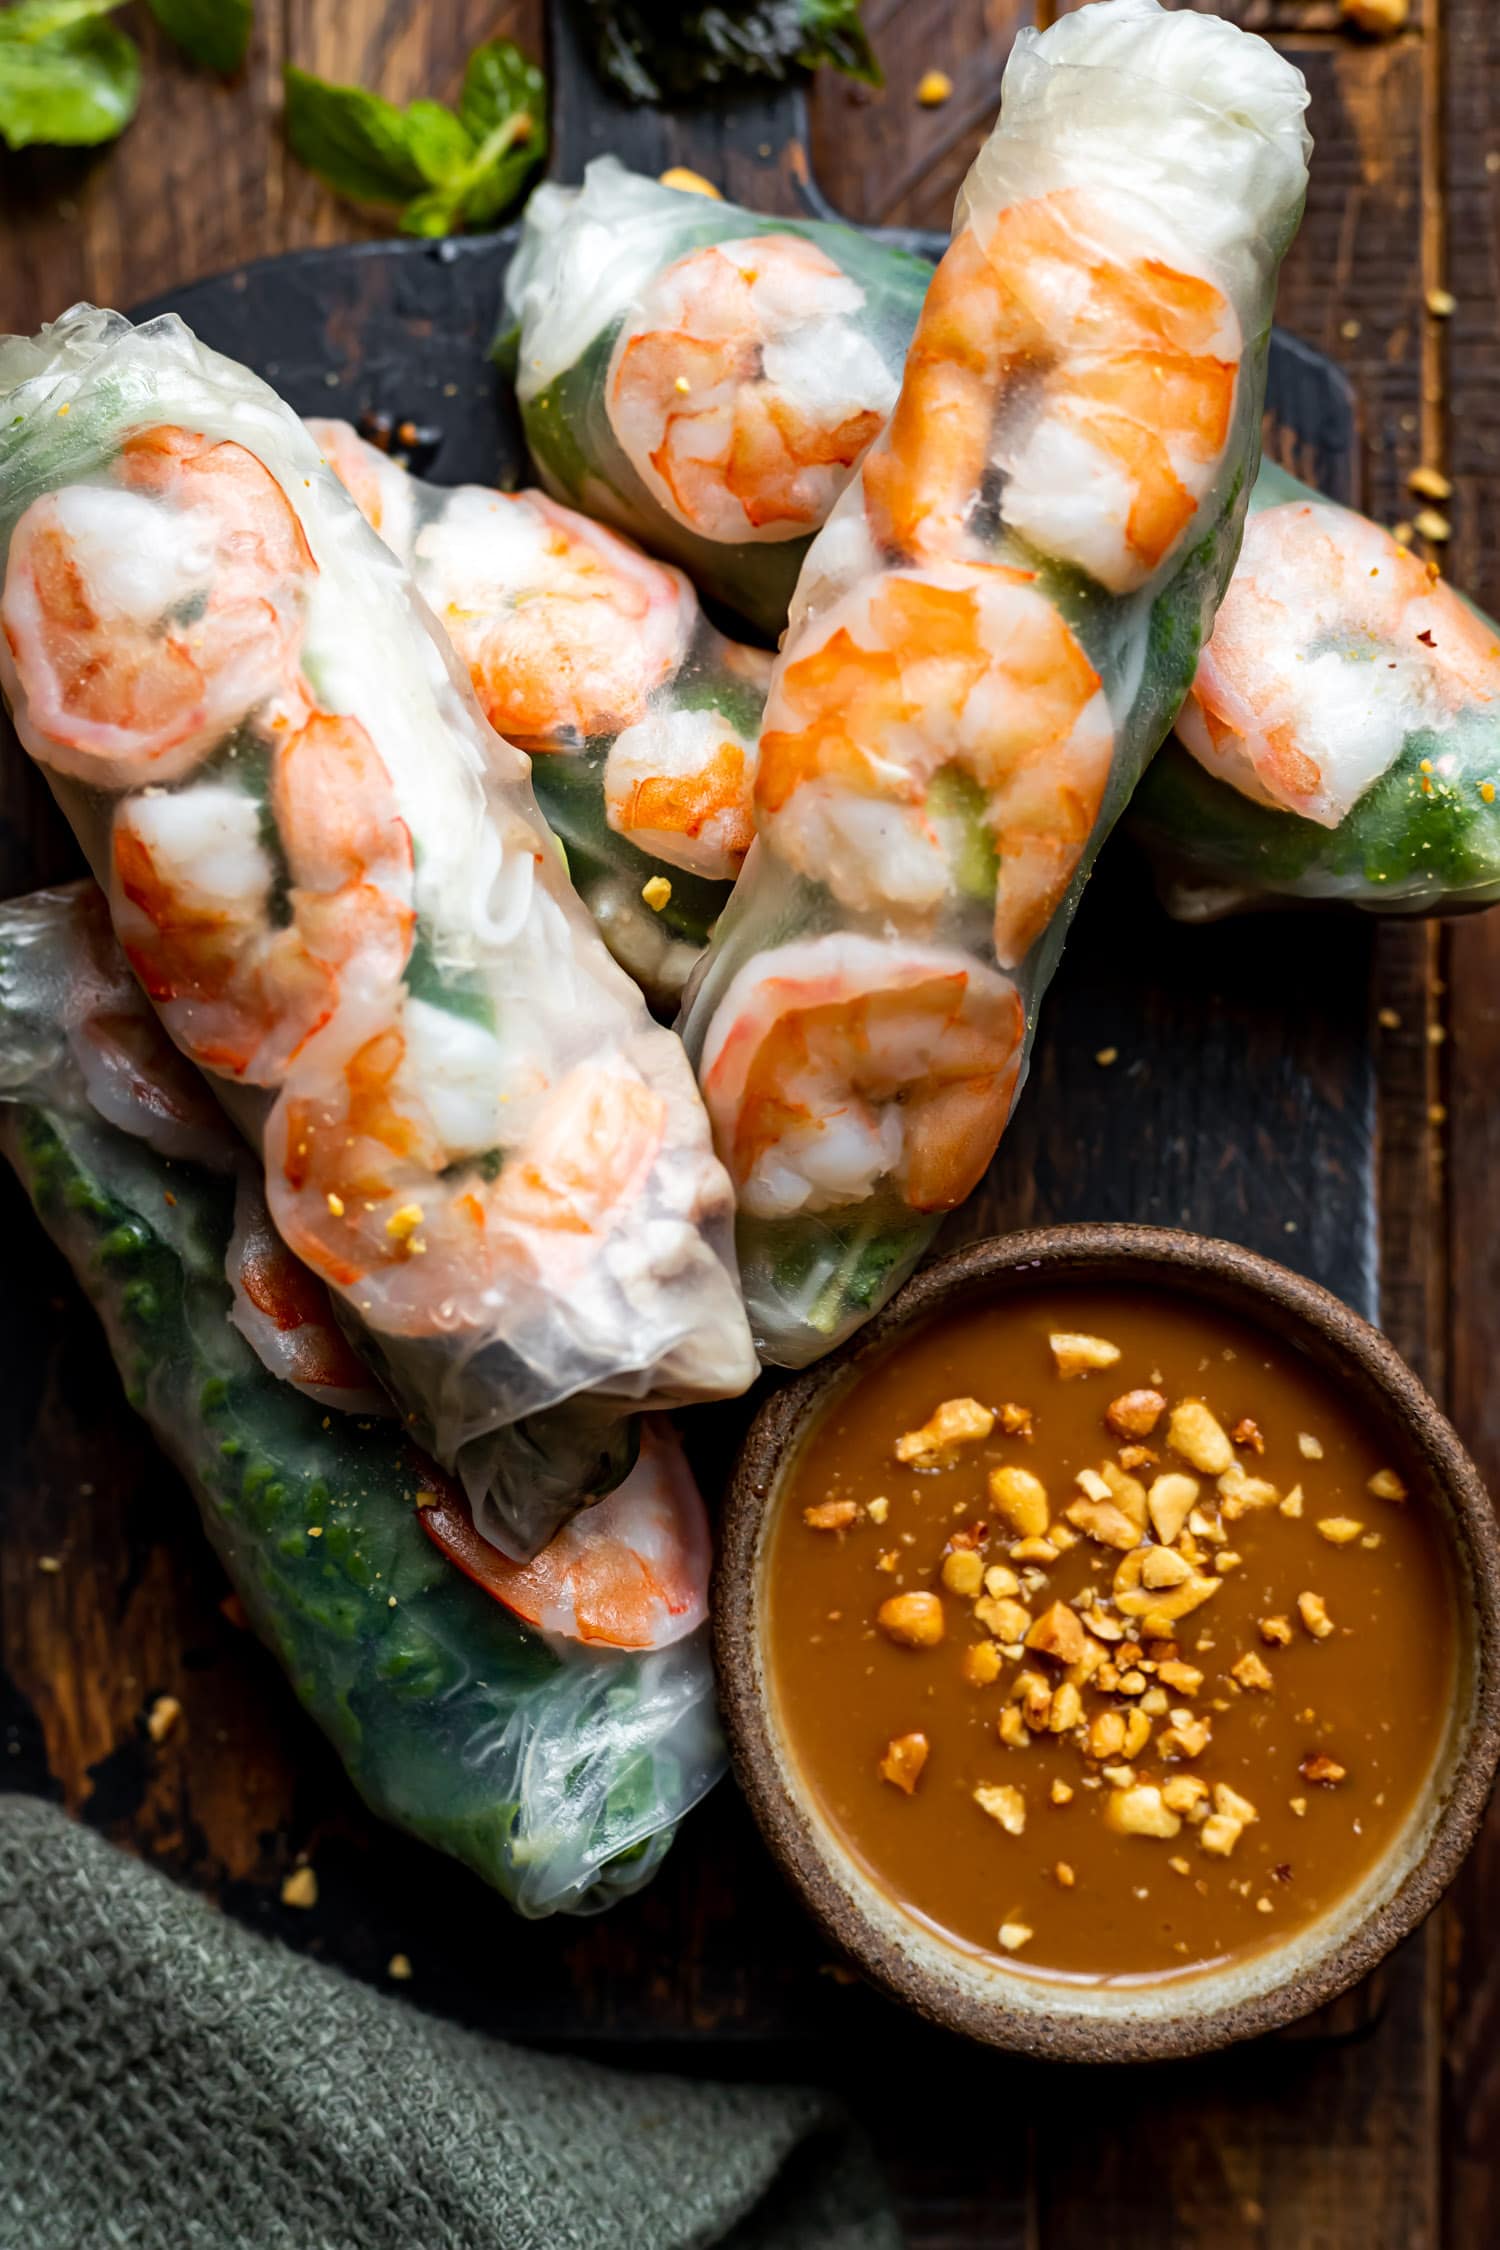 Top 20 must-try dishes in Ho Chi Minh City: Goi cuon - Vietnamese summer rolls